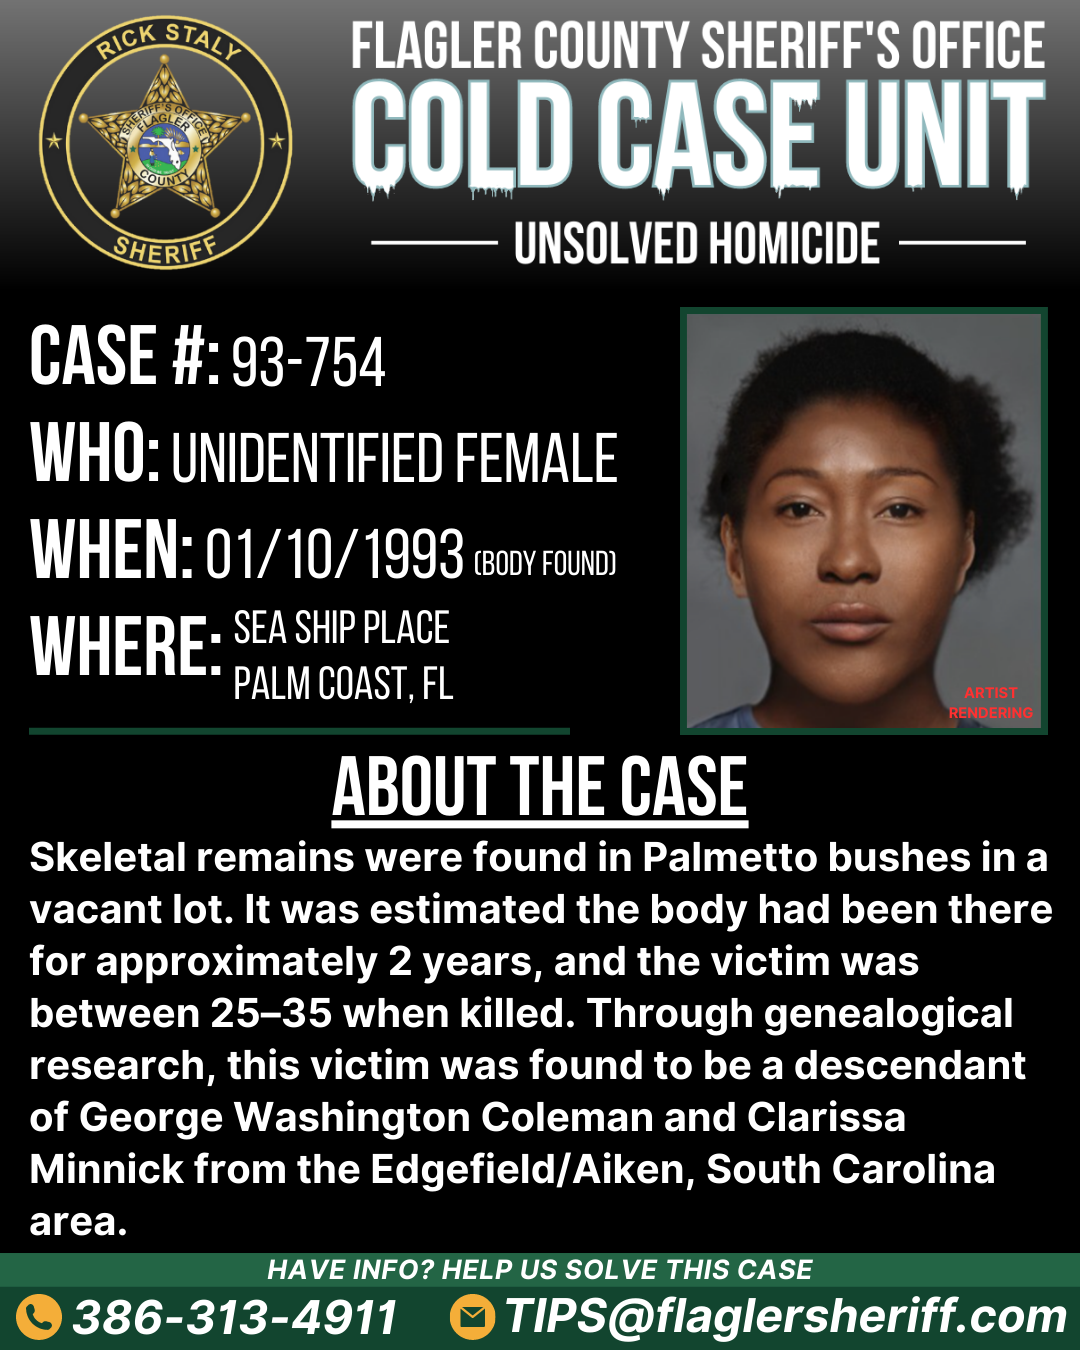 Unsolved homicide. Case #93-754. Who: Unidentified female. When: 01/10/1993. Where: Sea Ship Place (Palm Coast, FL). About the case: Skeletal remains were found in Palmetto bushes in a vacant lot. It was estimated the body had been there for approximately 2 years, and the victim was between 25–35 when killed. Through genealogical research, this victim was found to be a descendant of George Washington Coleman and Clarissa Minnick from the Edgefield/Aiken, South Carolina area.